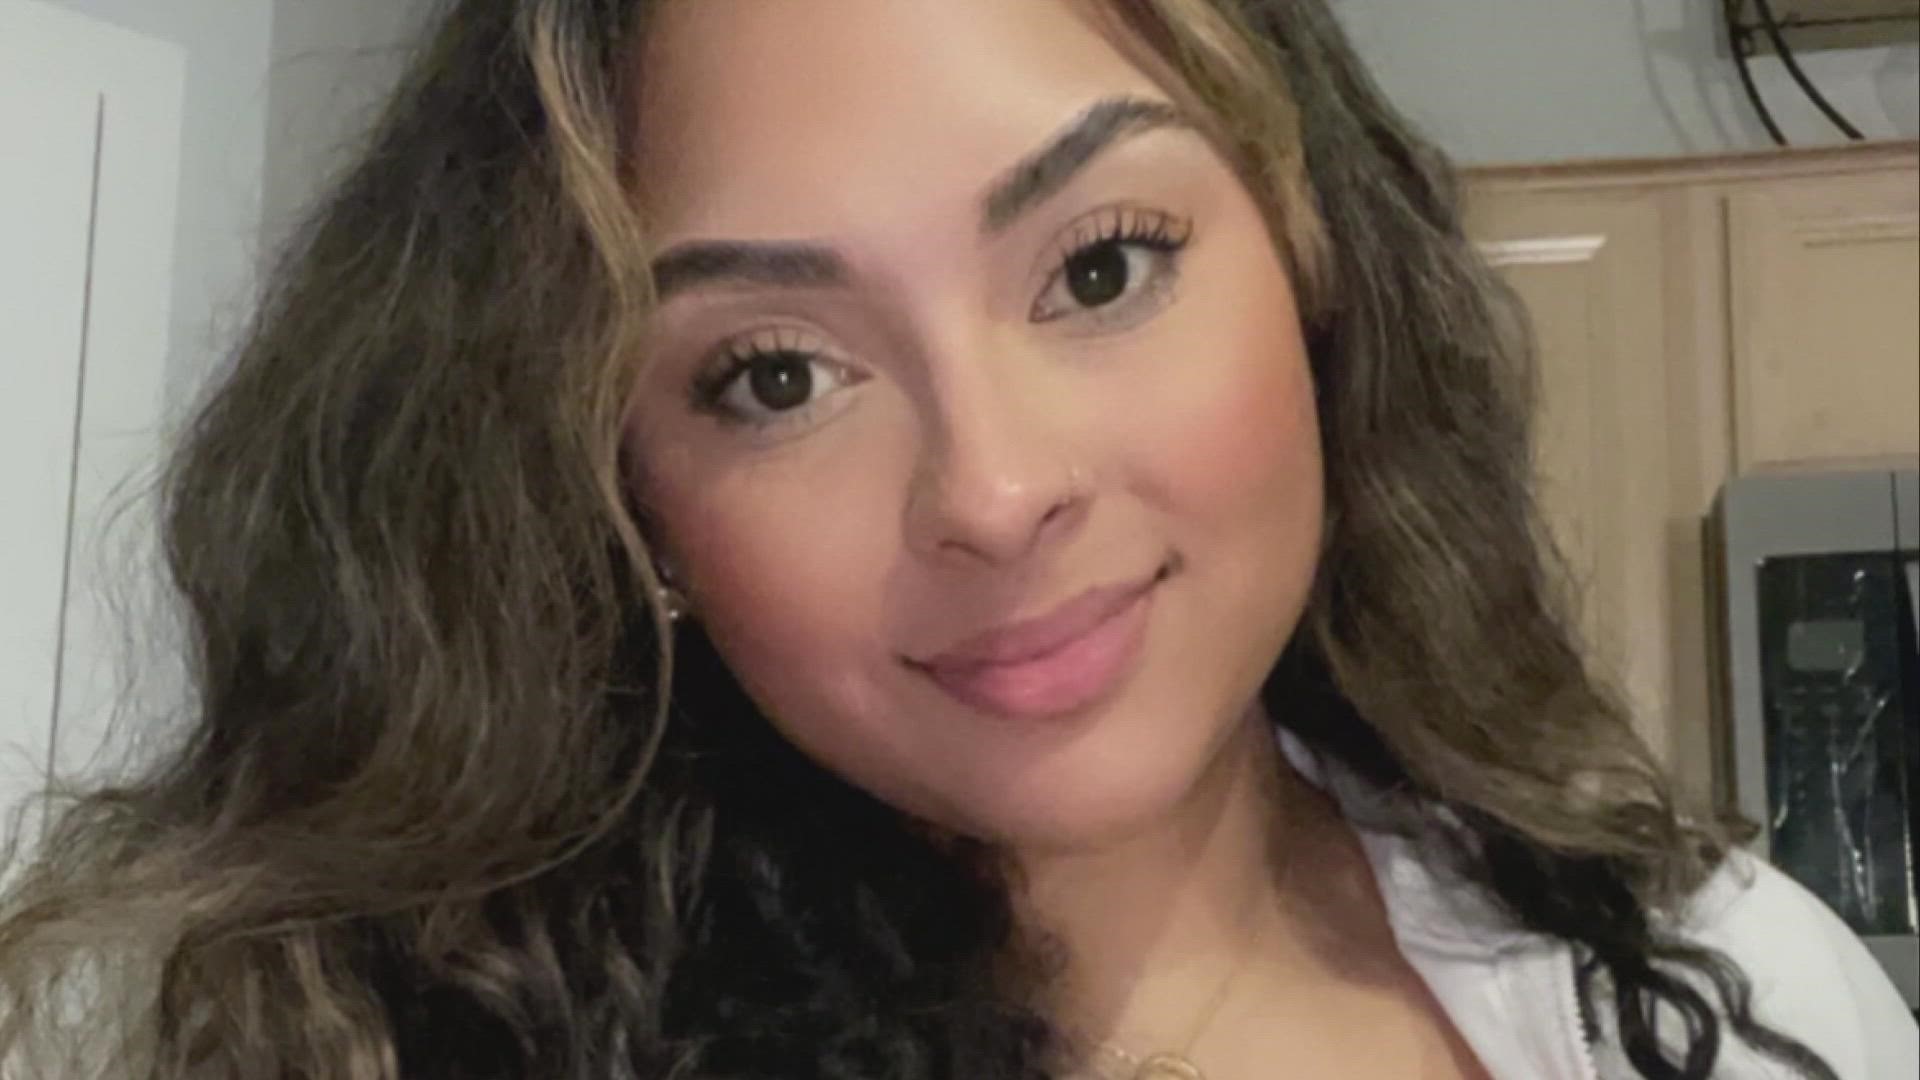 A man suspected of driving under the influence, is accused of killing 22-year-old Vanessa Urbina and injuring her boyfriend as they stood on a San Diego sidewalk.